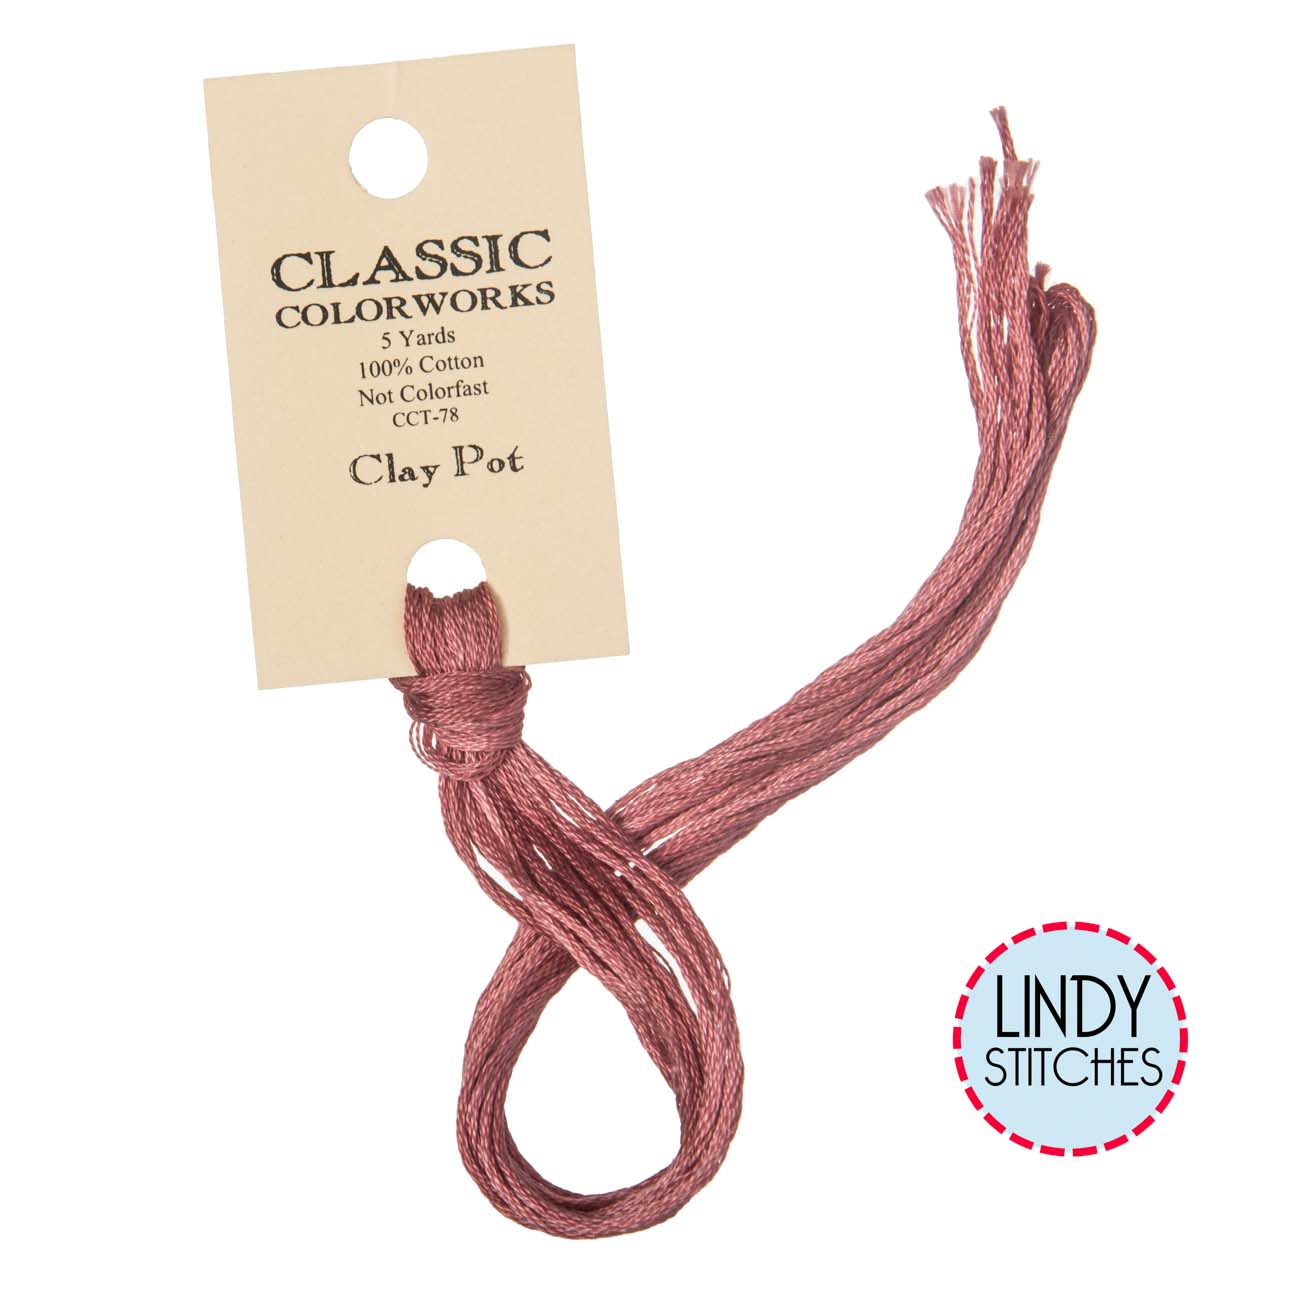 Clay Pot Classic Colorworks Floss Hand Dyed Cotton Skein